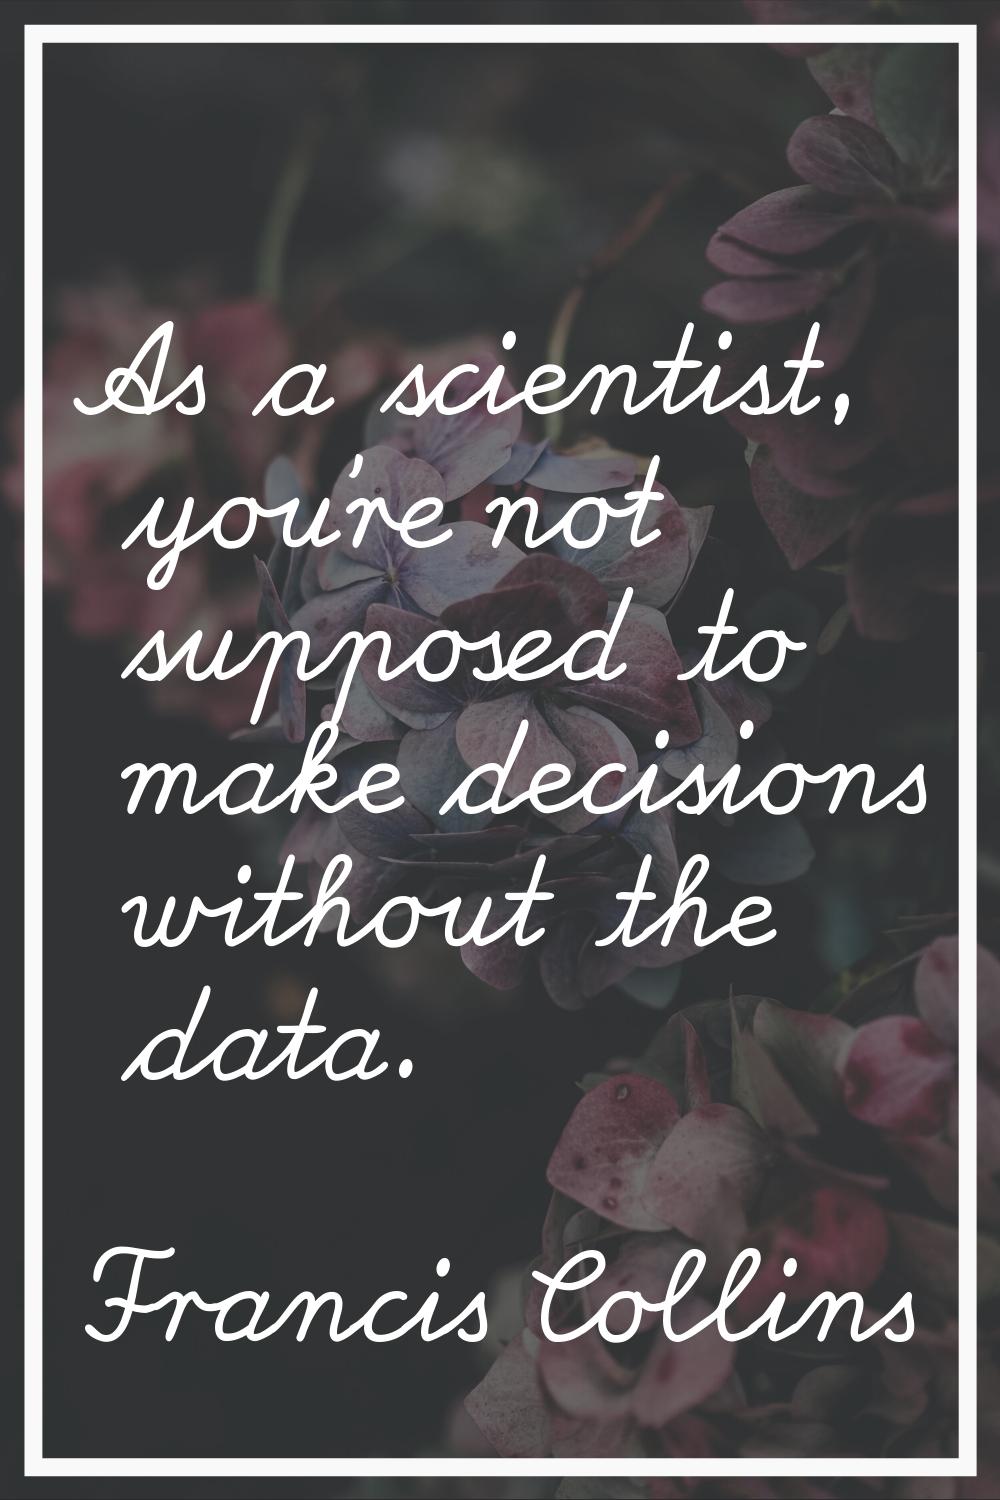 As a scientist, you're not supposed to make decisions without the data.